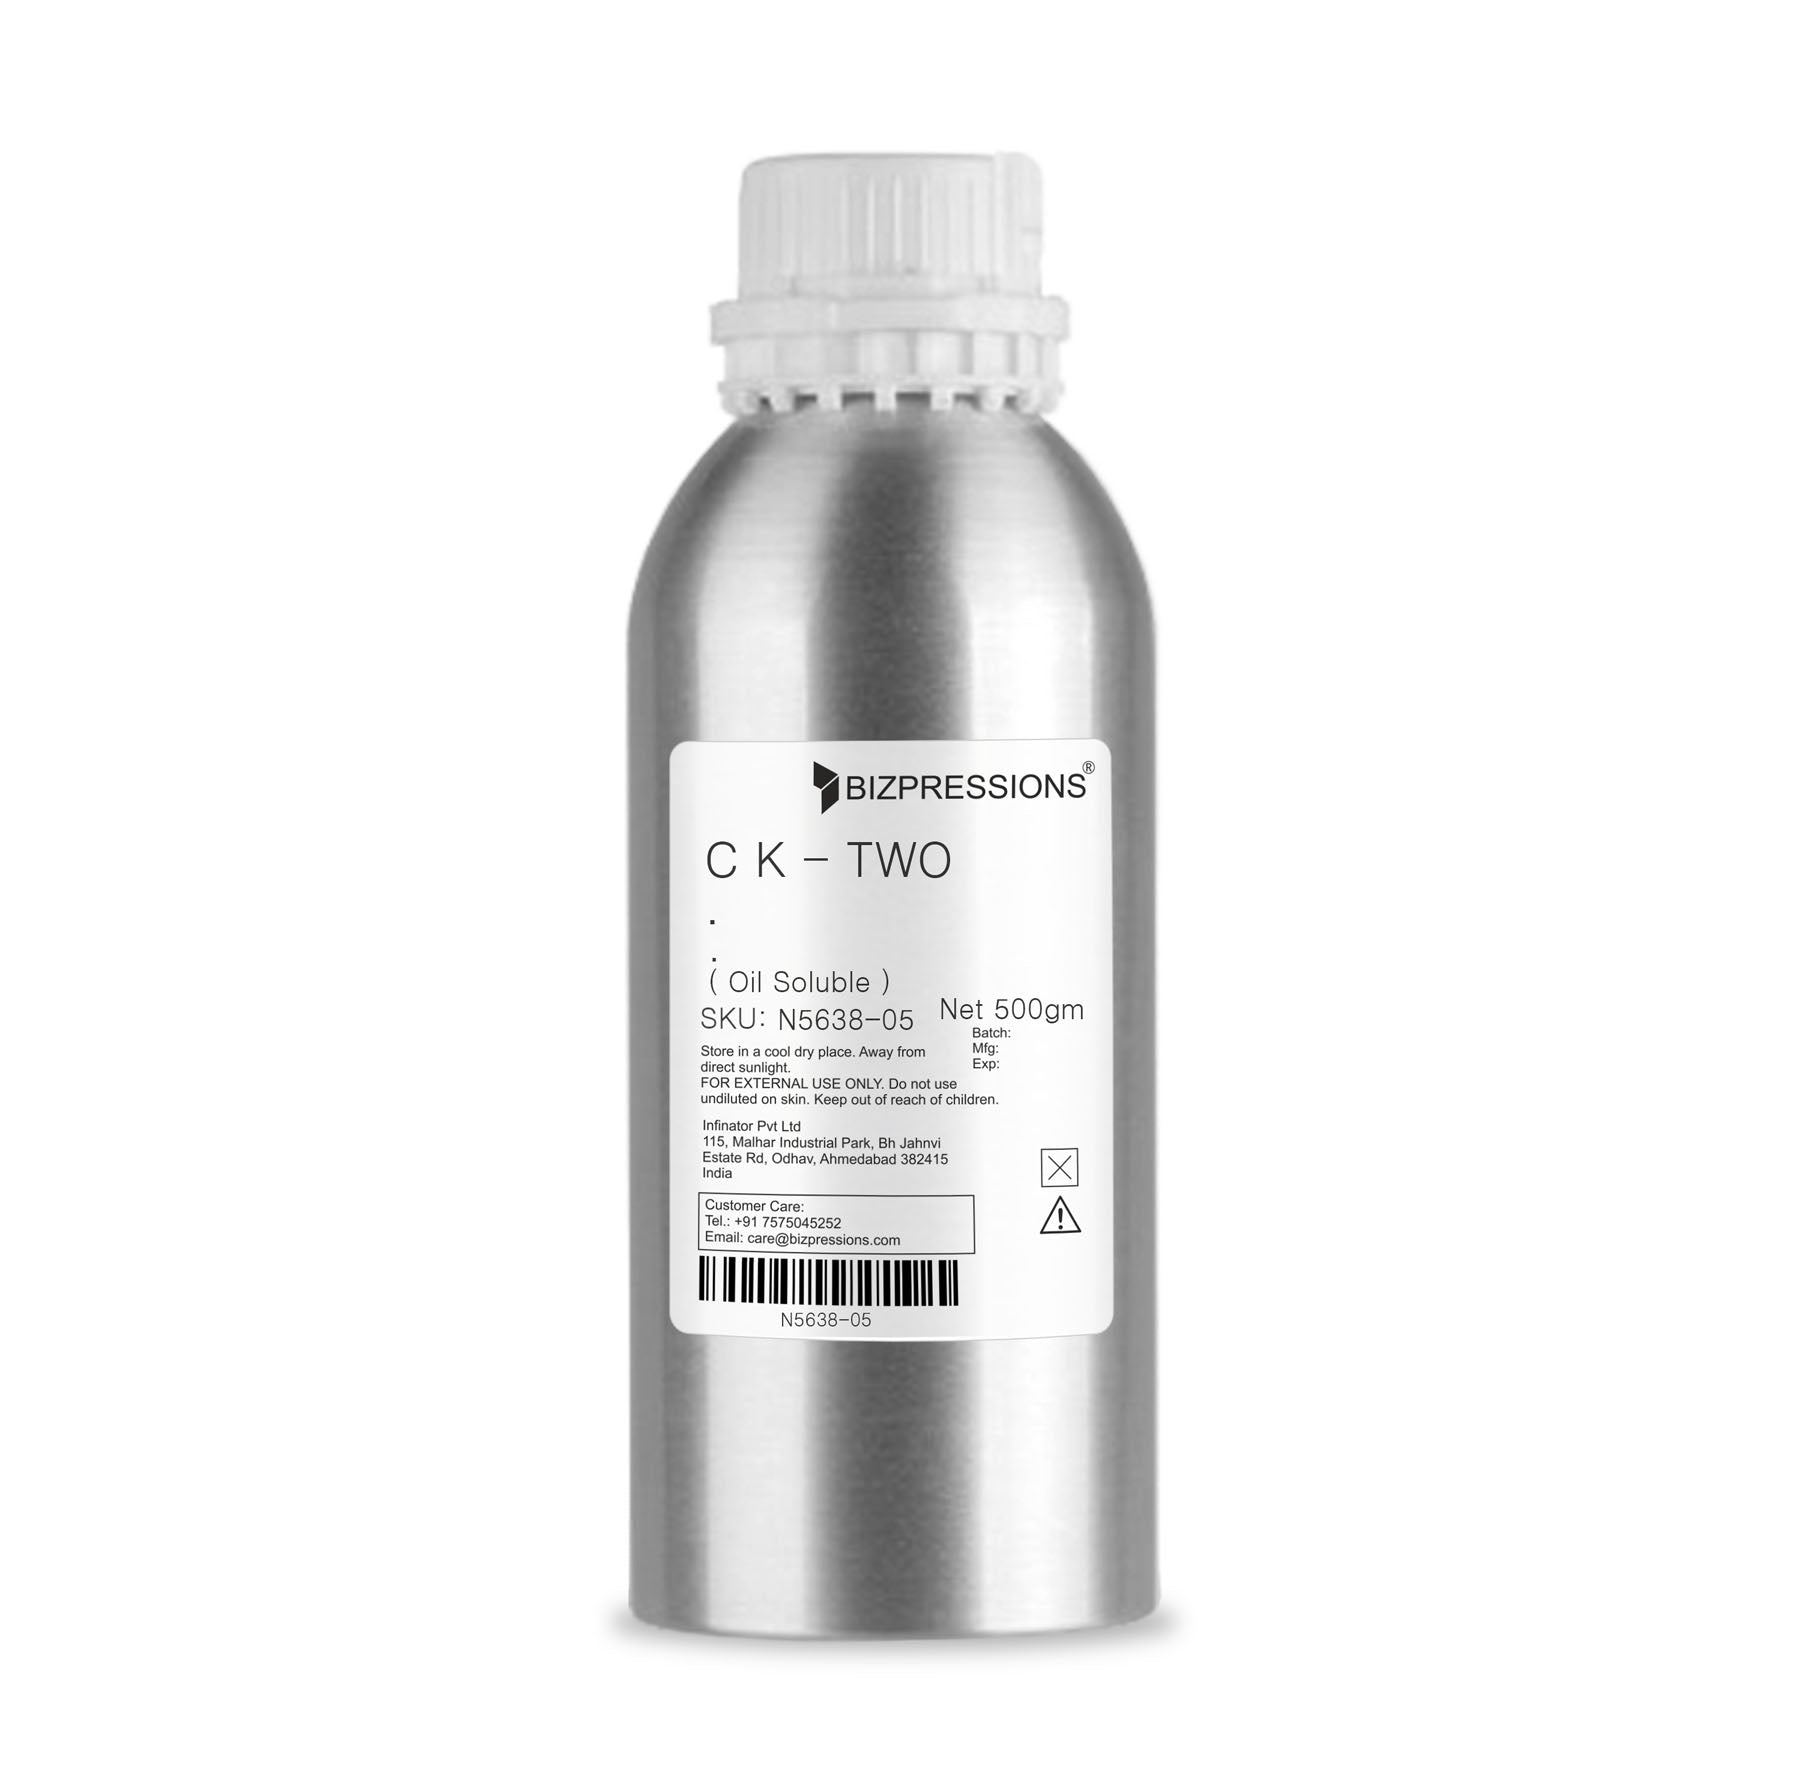 C K - TWO - Fragrance ( Oil Soluble ) - 500 gm